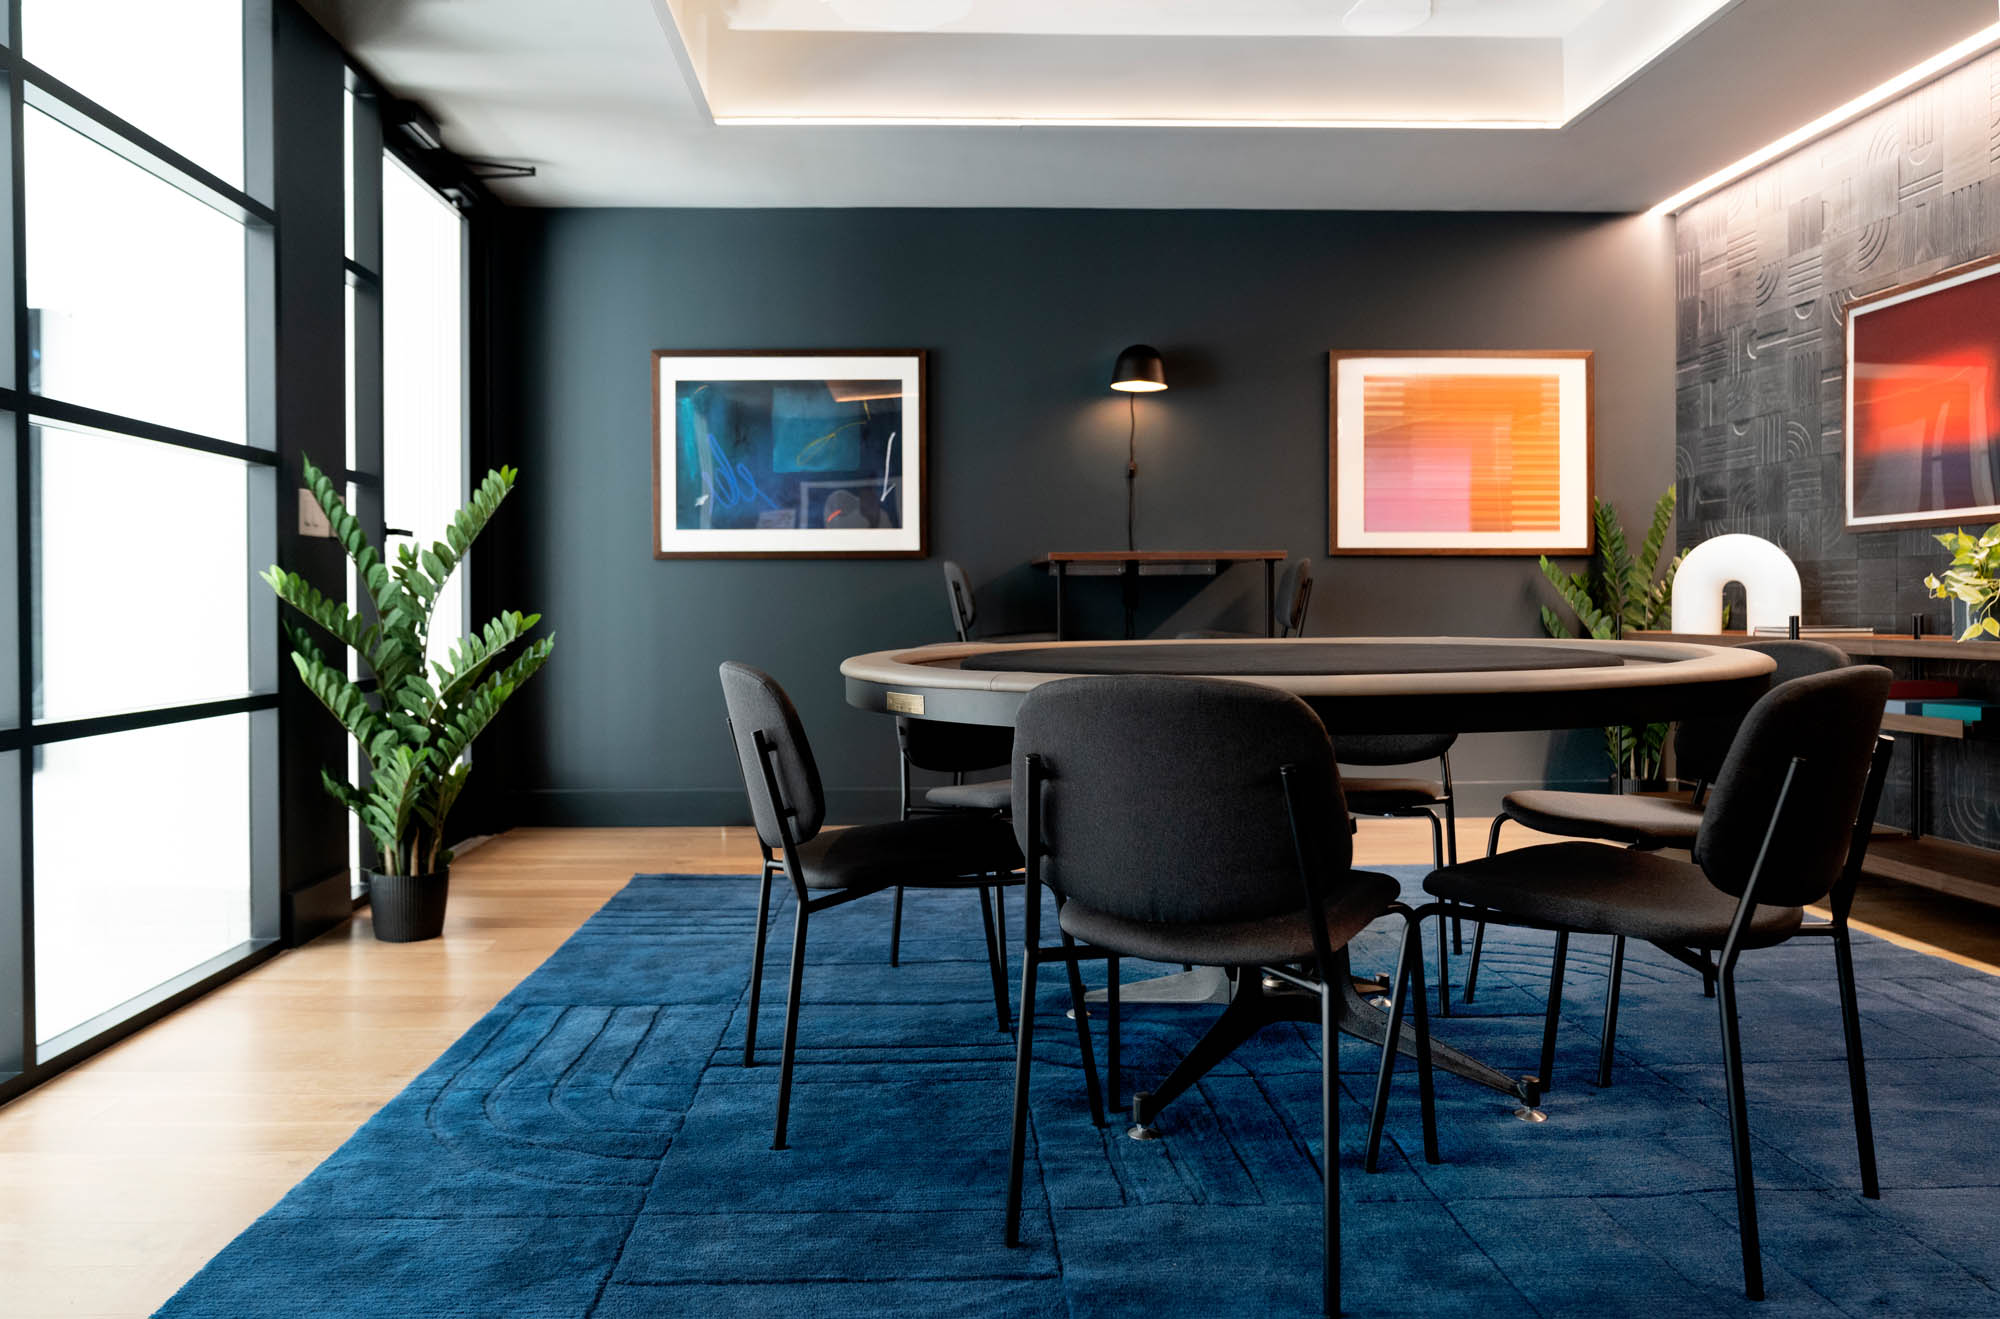 An cozy entertainment room with dark walls, a navy carpet, black chairs and a round gambling table in the middle